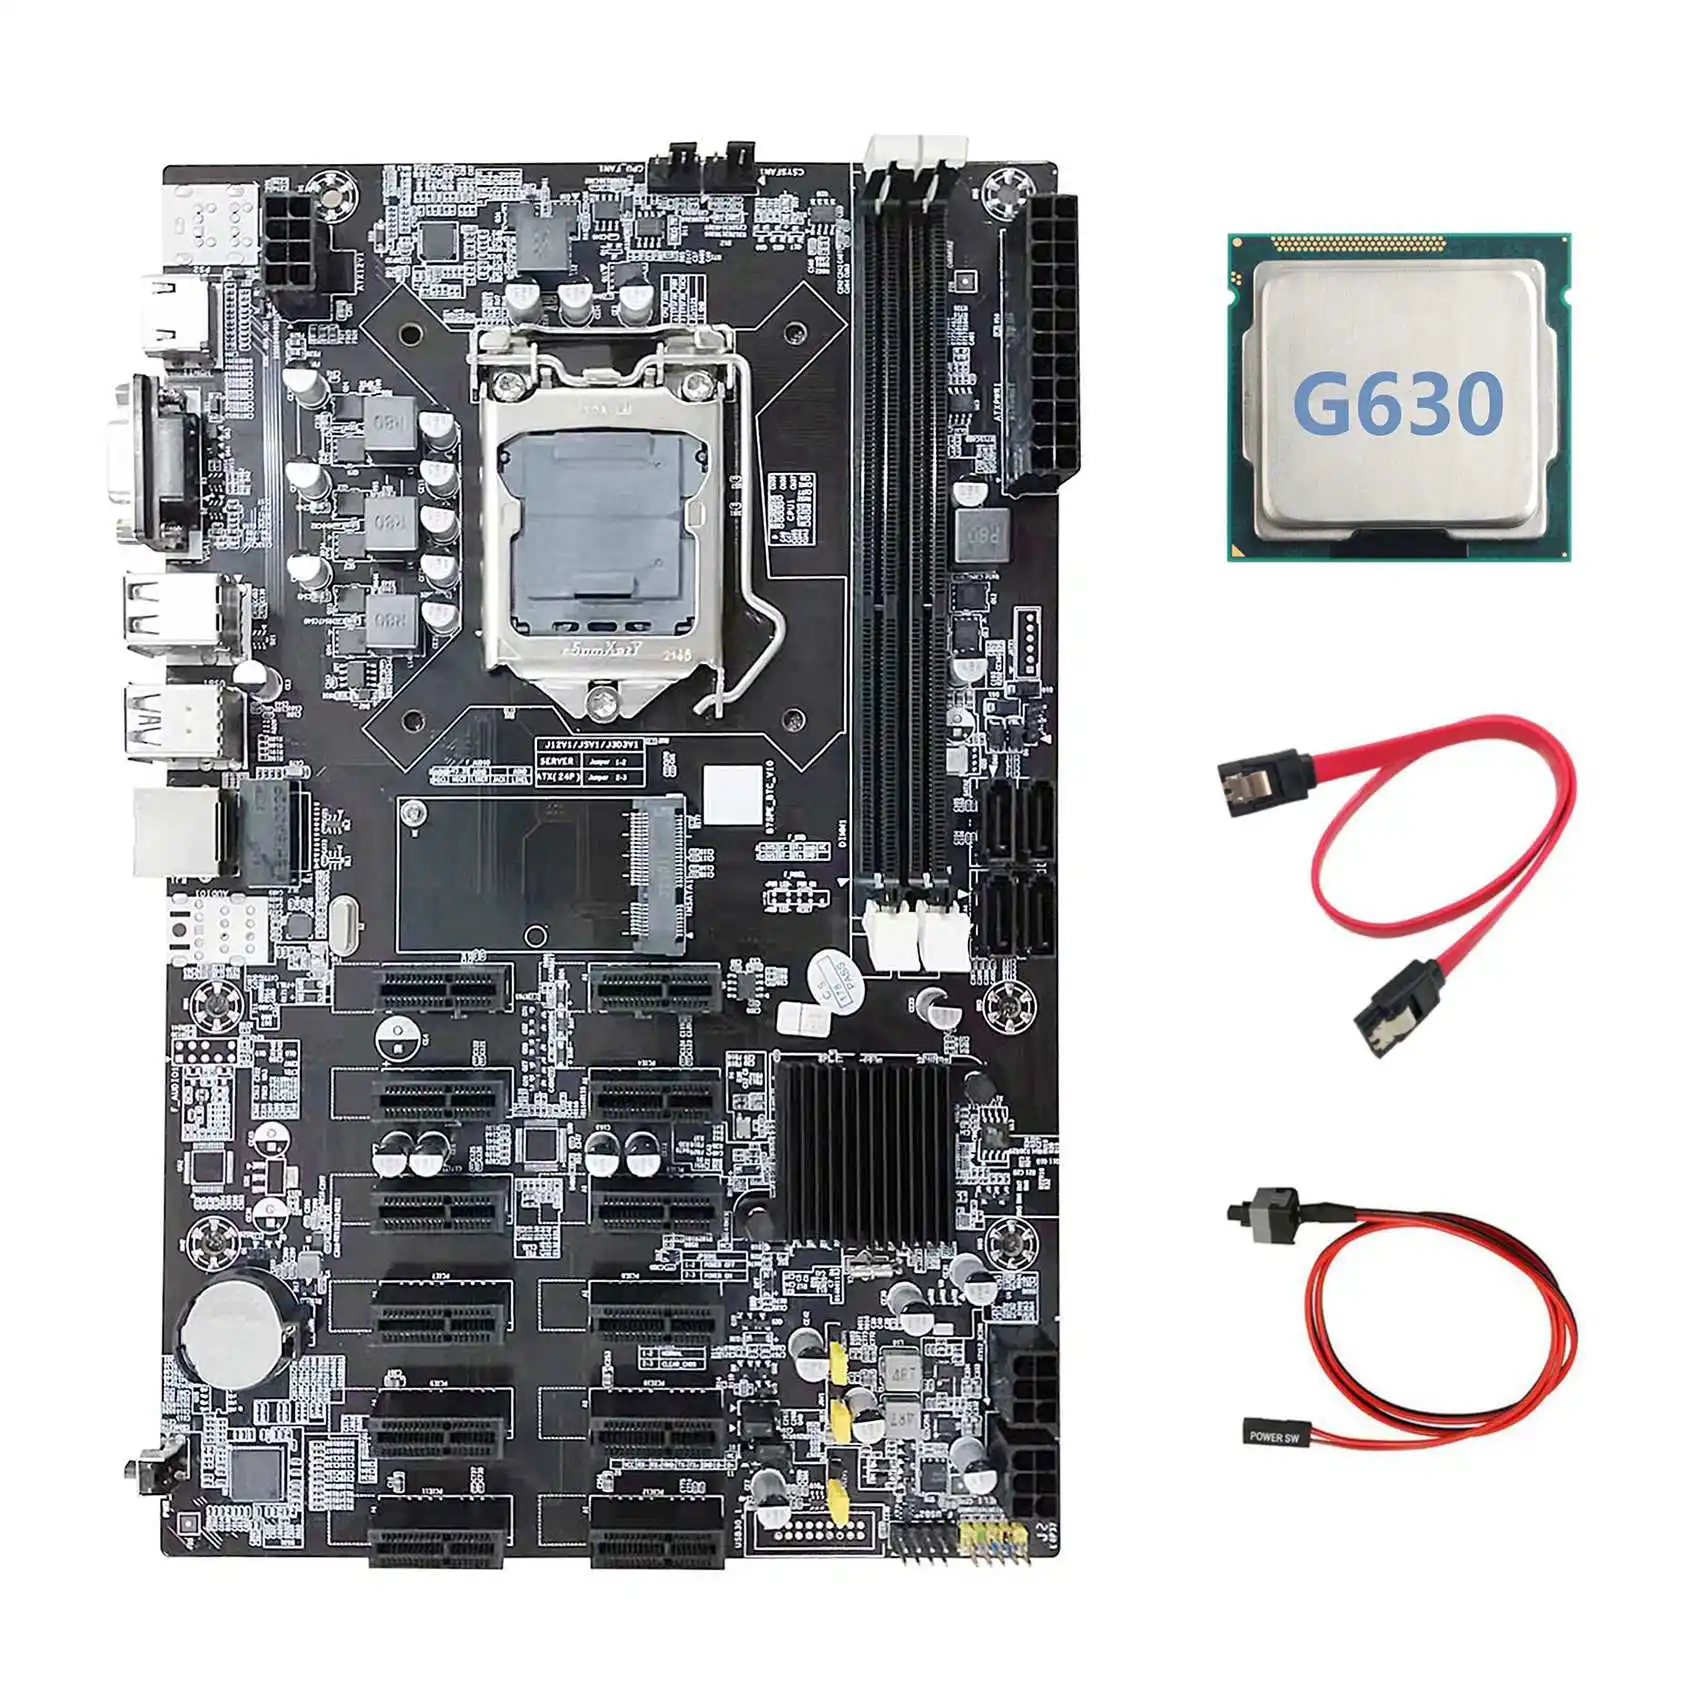 B75 12 PCIE ETH Mining Motherboard+G630 CPU+SATA Cable+Switch Cable LGA1155 MSATA DDR3 B75 BTC Miner Motherboard